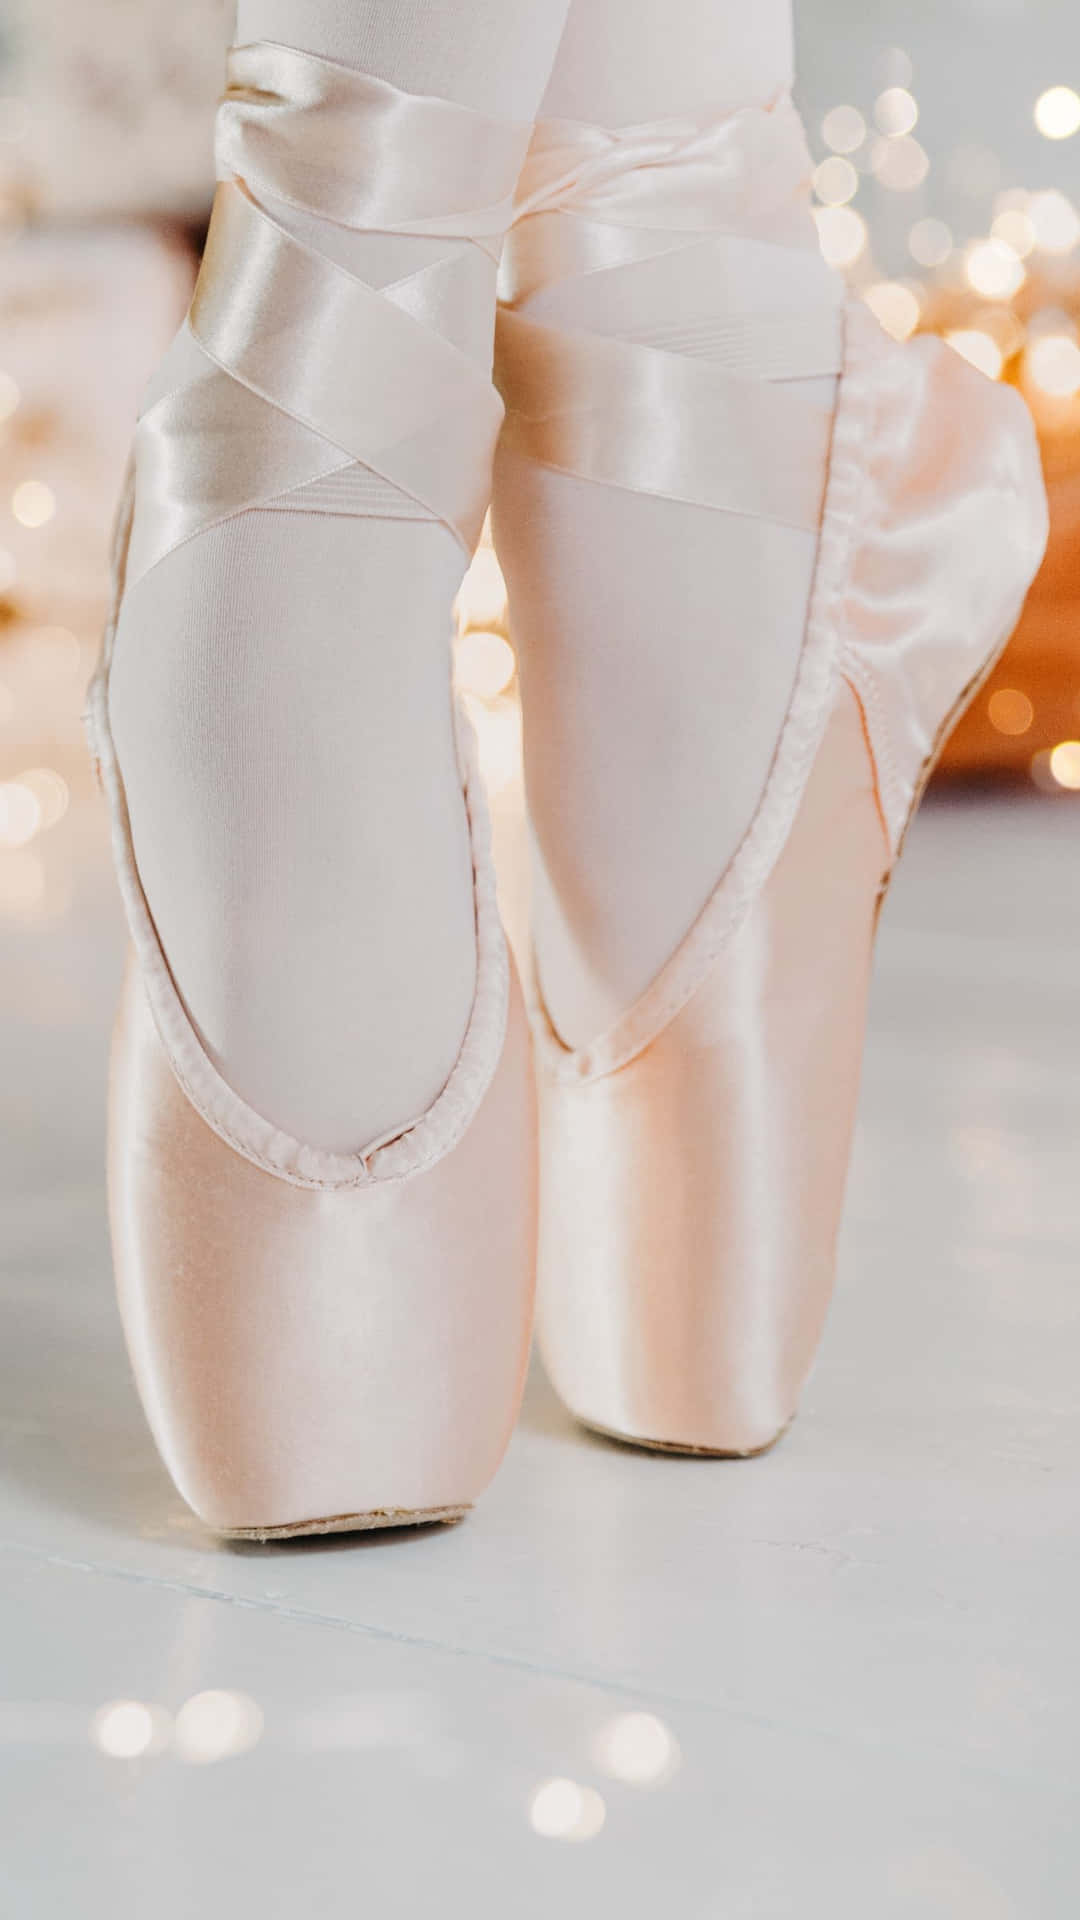 A young ballerina wearing classic pointe shoes gracefully in a tutu Wallpaper